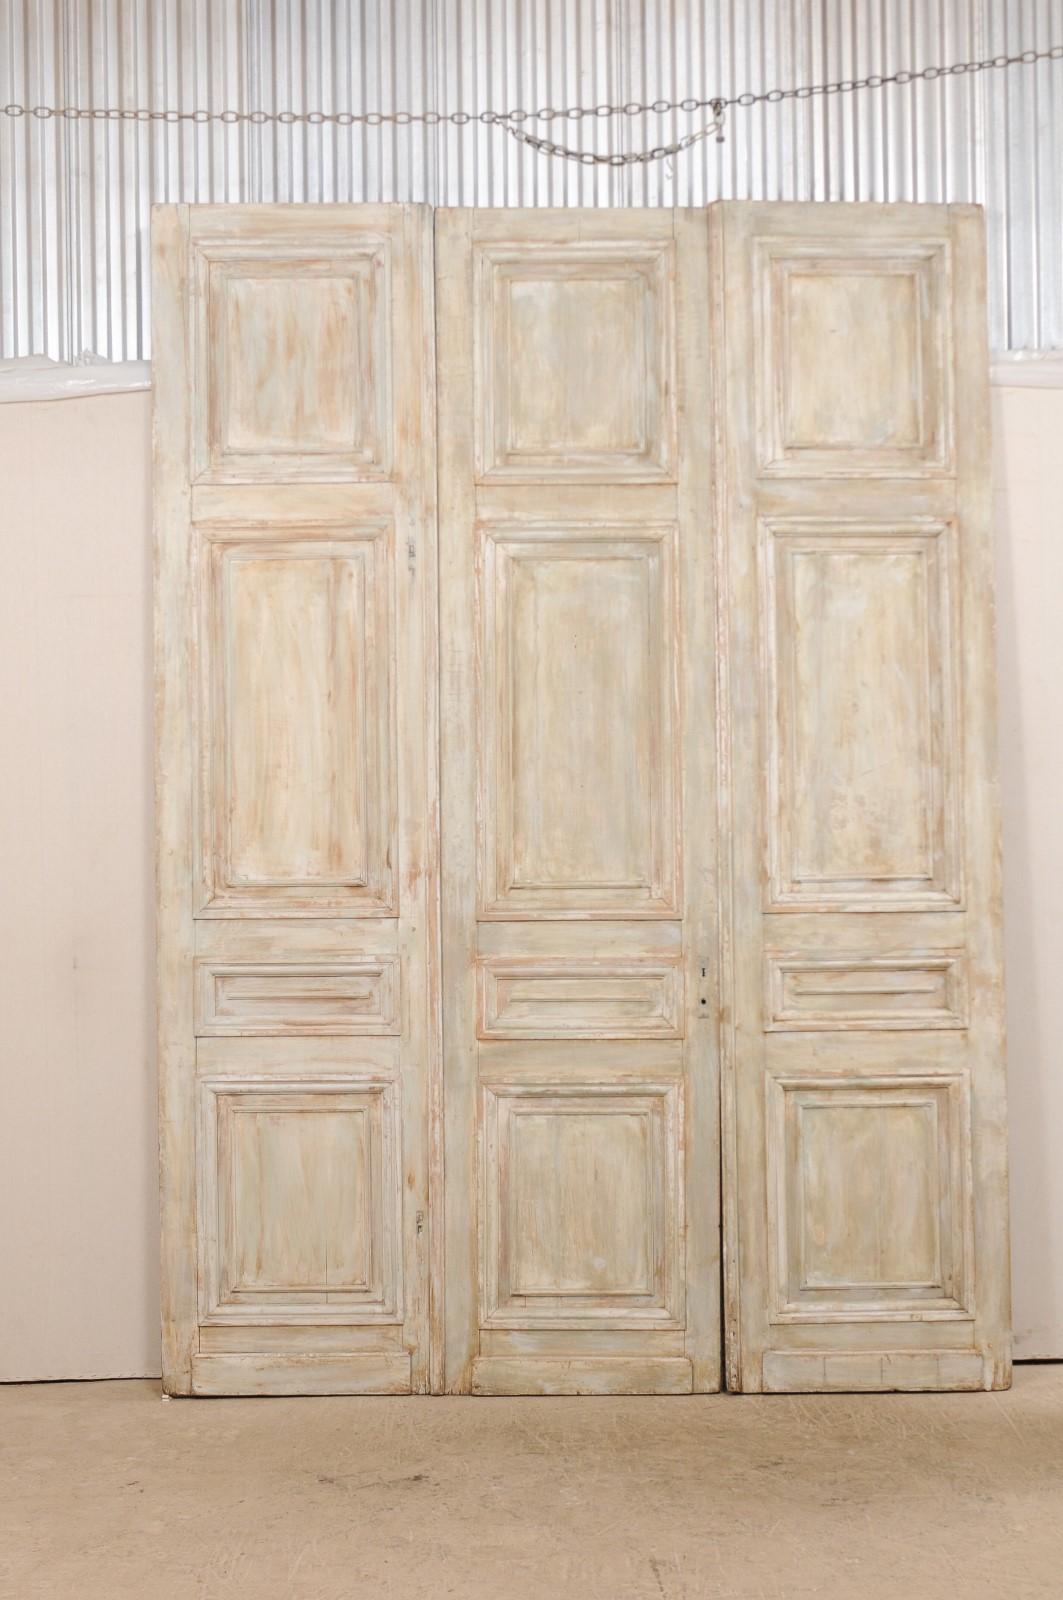 This set of tall doors from the 19th century includes a single stationary door which pairs alongside a doubled, bi-folding door. These lovely antique doors from France each have four molded and recessed panels, adorning both the front and back sides